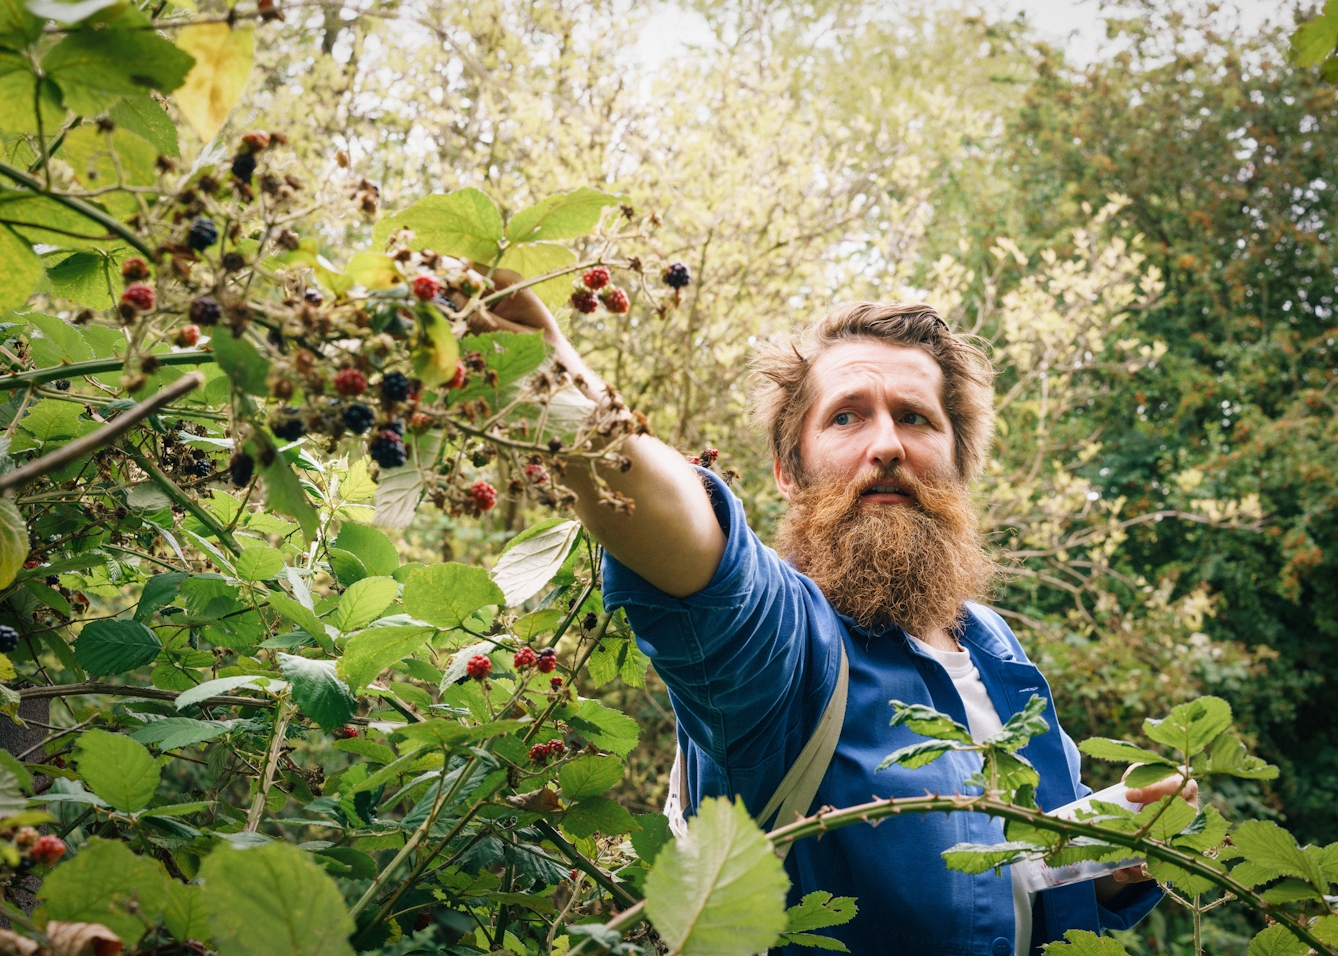 Photograph of a bearded man wearing a white t-shirt and unbuttoned blue shirt, reaching out to pick blackberries from a bush. He is surrounded by the greenery of the bushes and leaves of the trees.